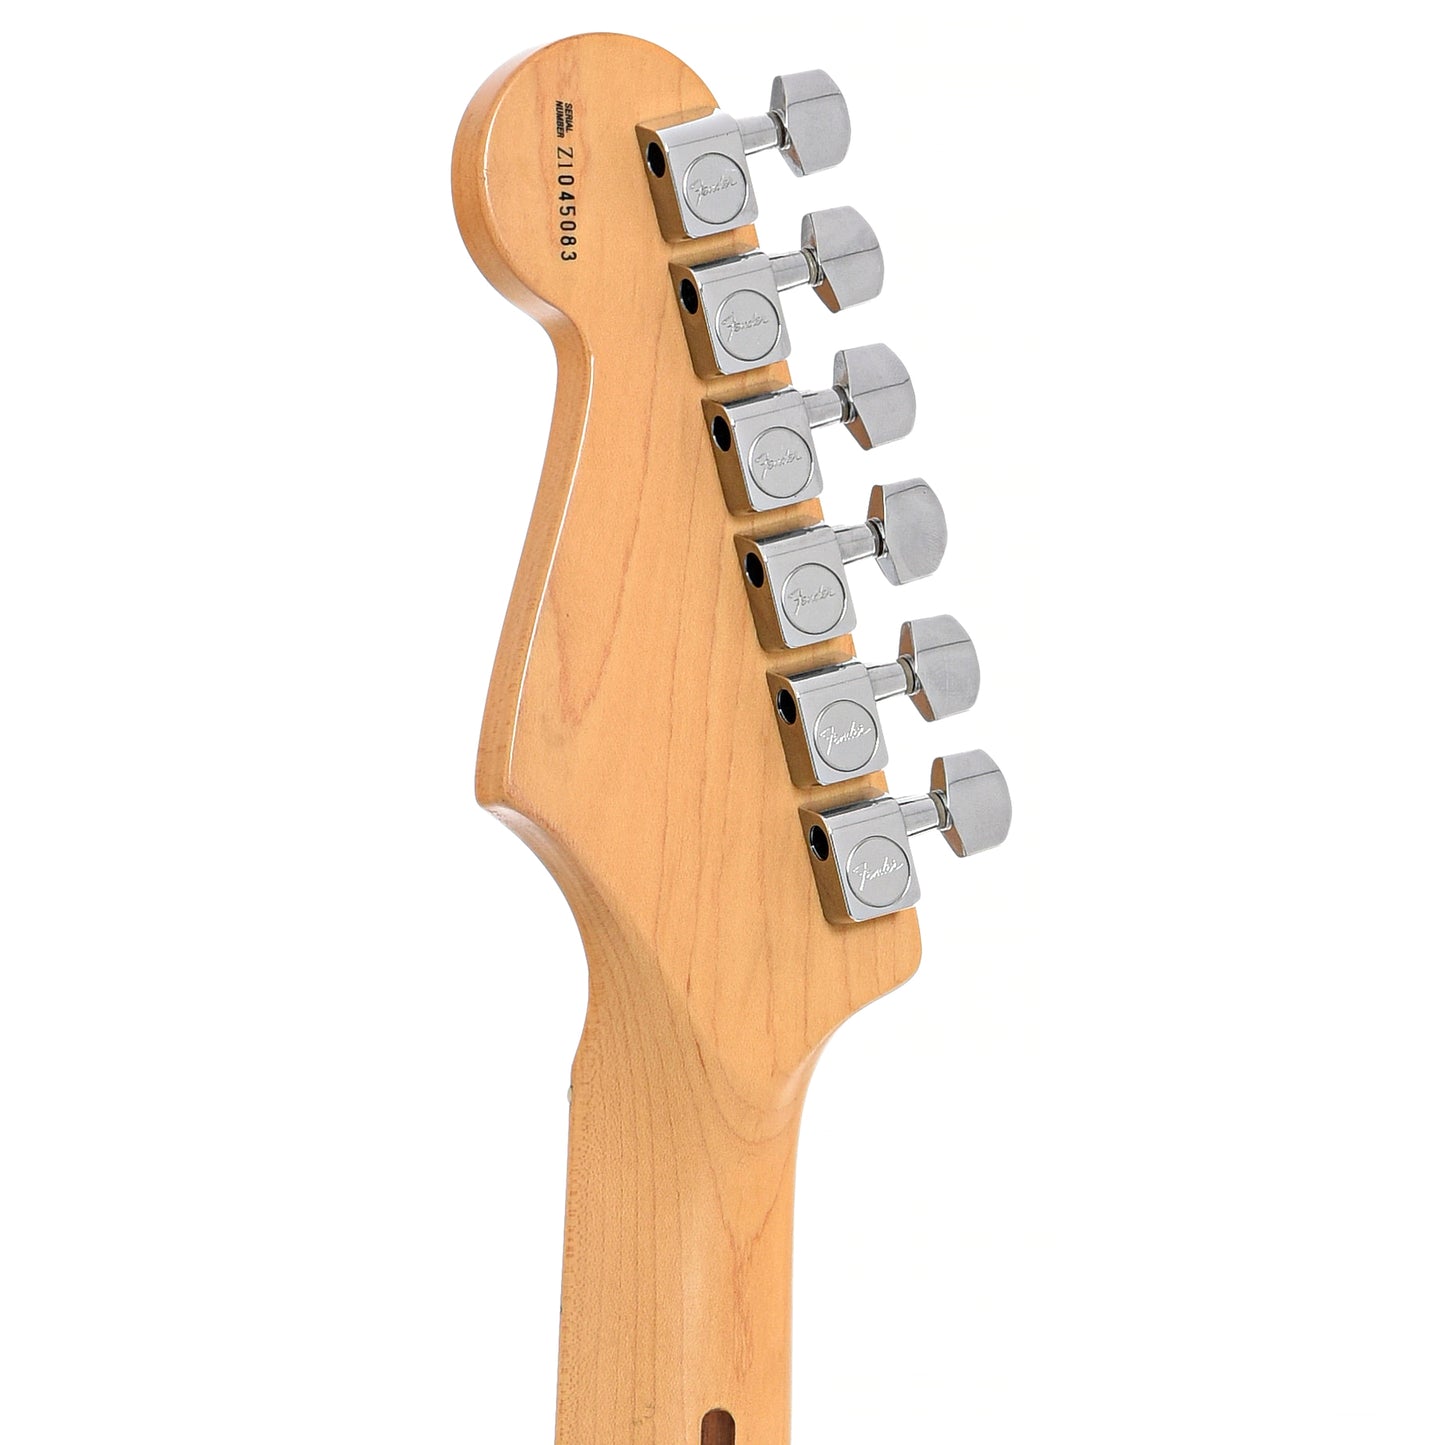 BAck headstock of Fender American Series Stratocaster Electric Guitar (2001)